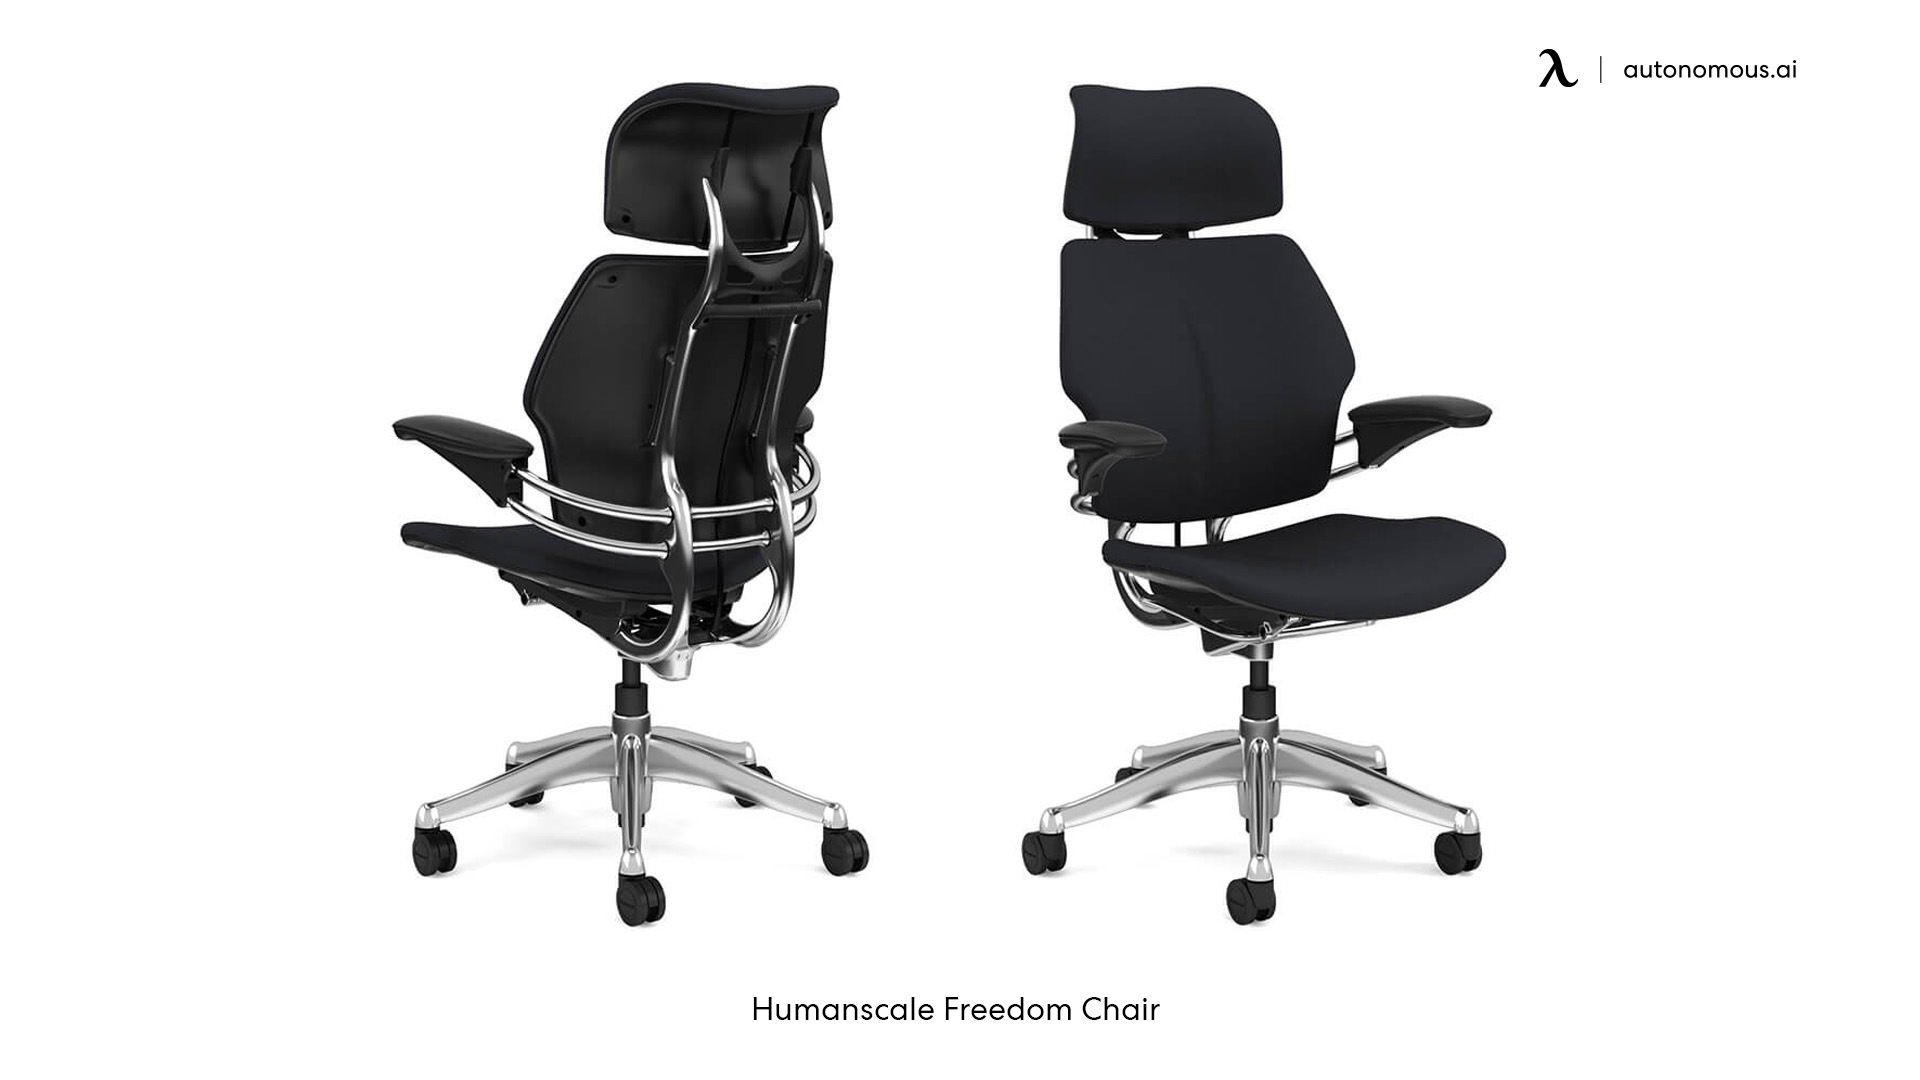 Humanscale Freedom lumbar support chair